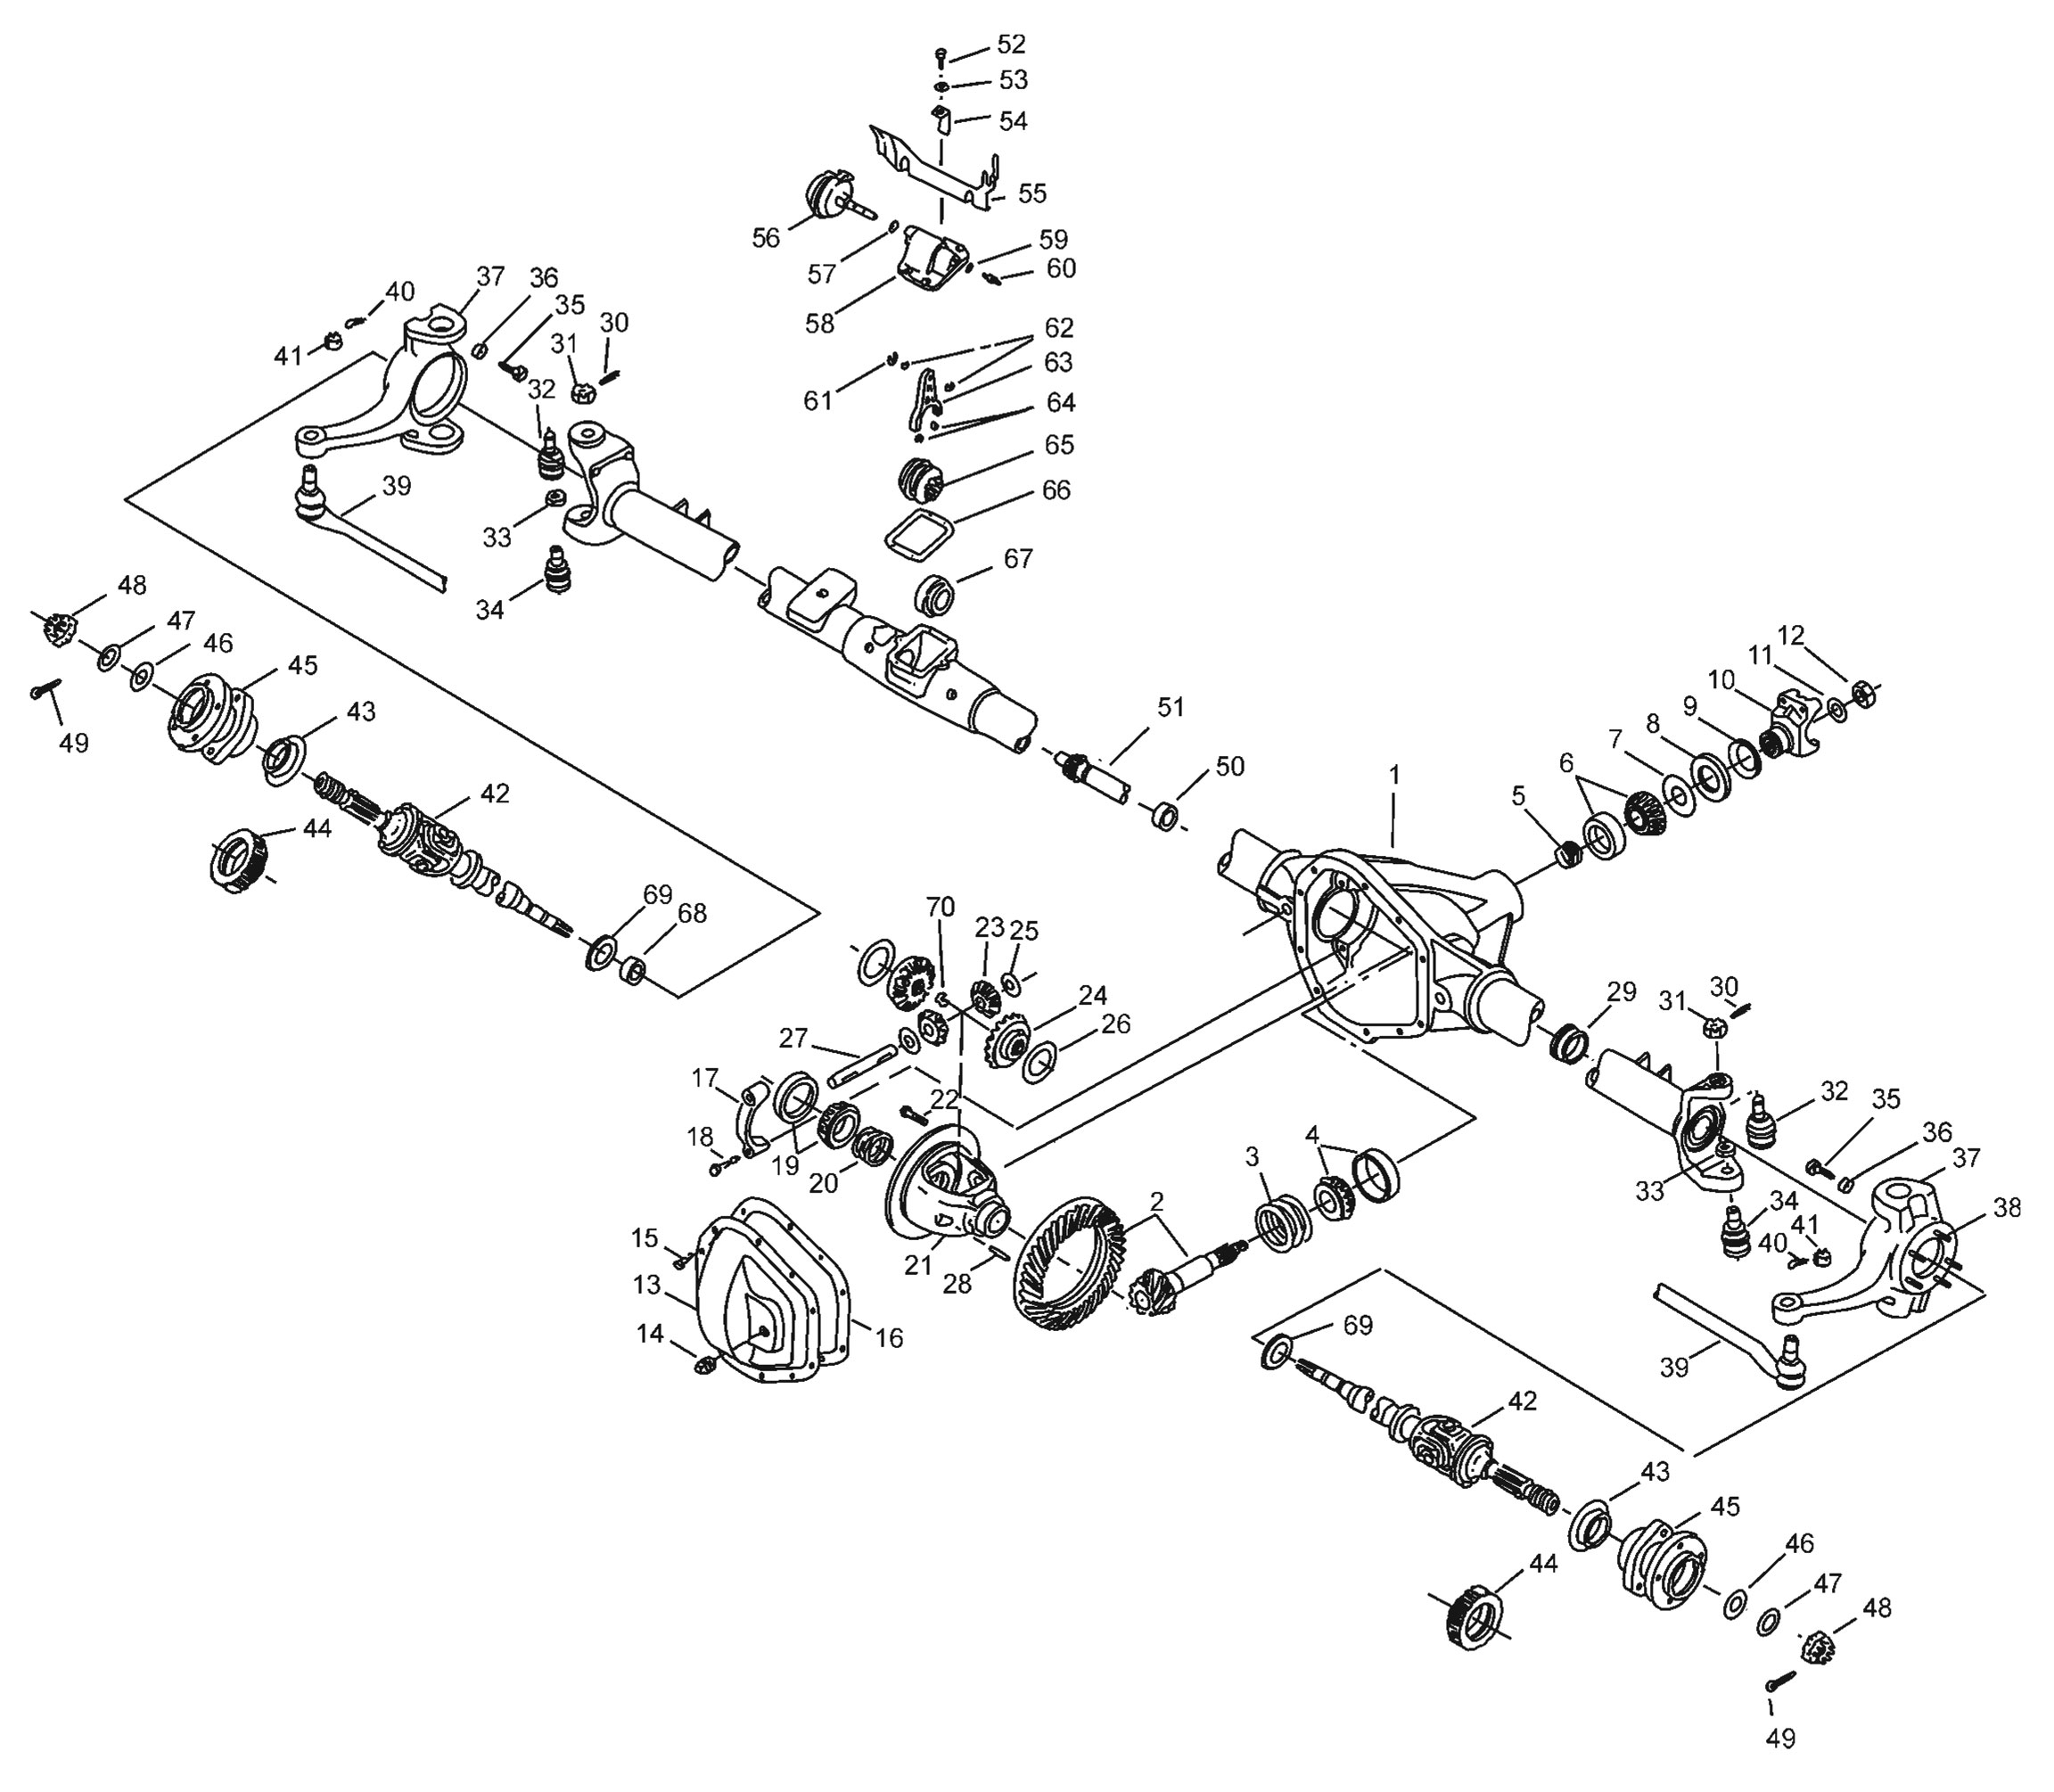 Dana 44 Front Axle Assembly - Parts Diagram